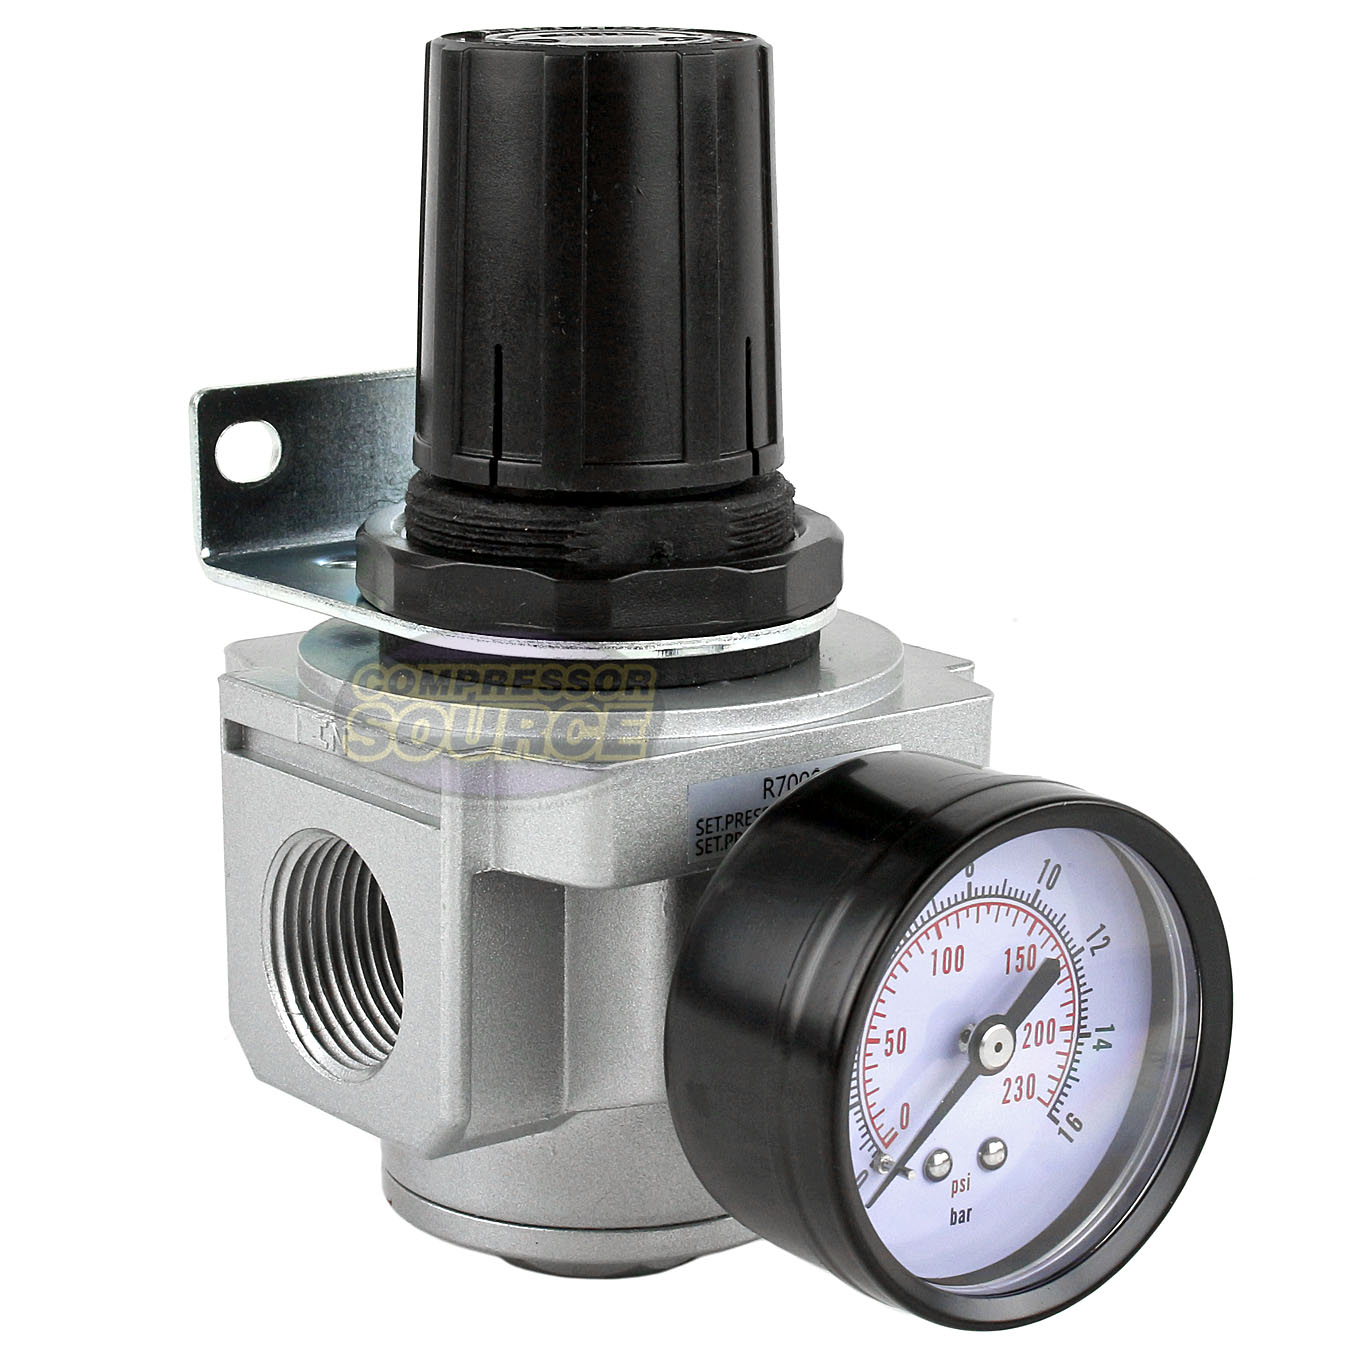 3/4" Air Compressor Pressure Regulator with Gauge and Wall Mounting Bracket